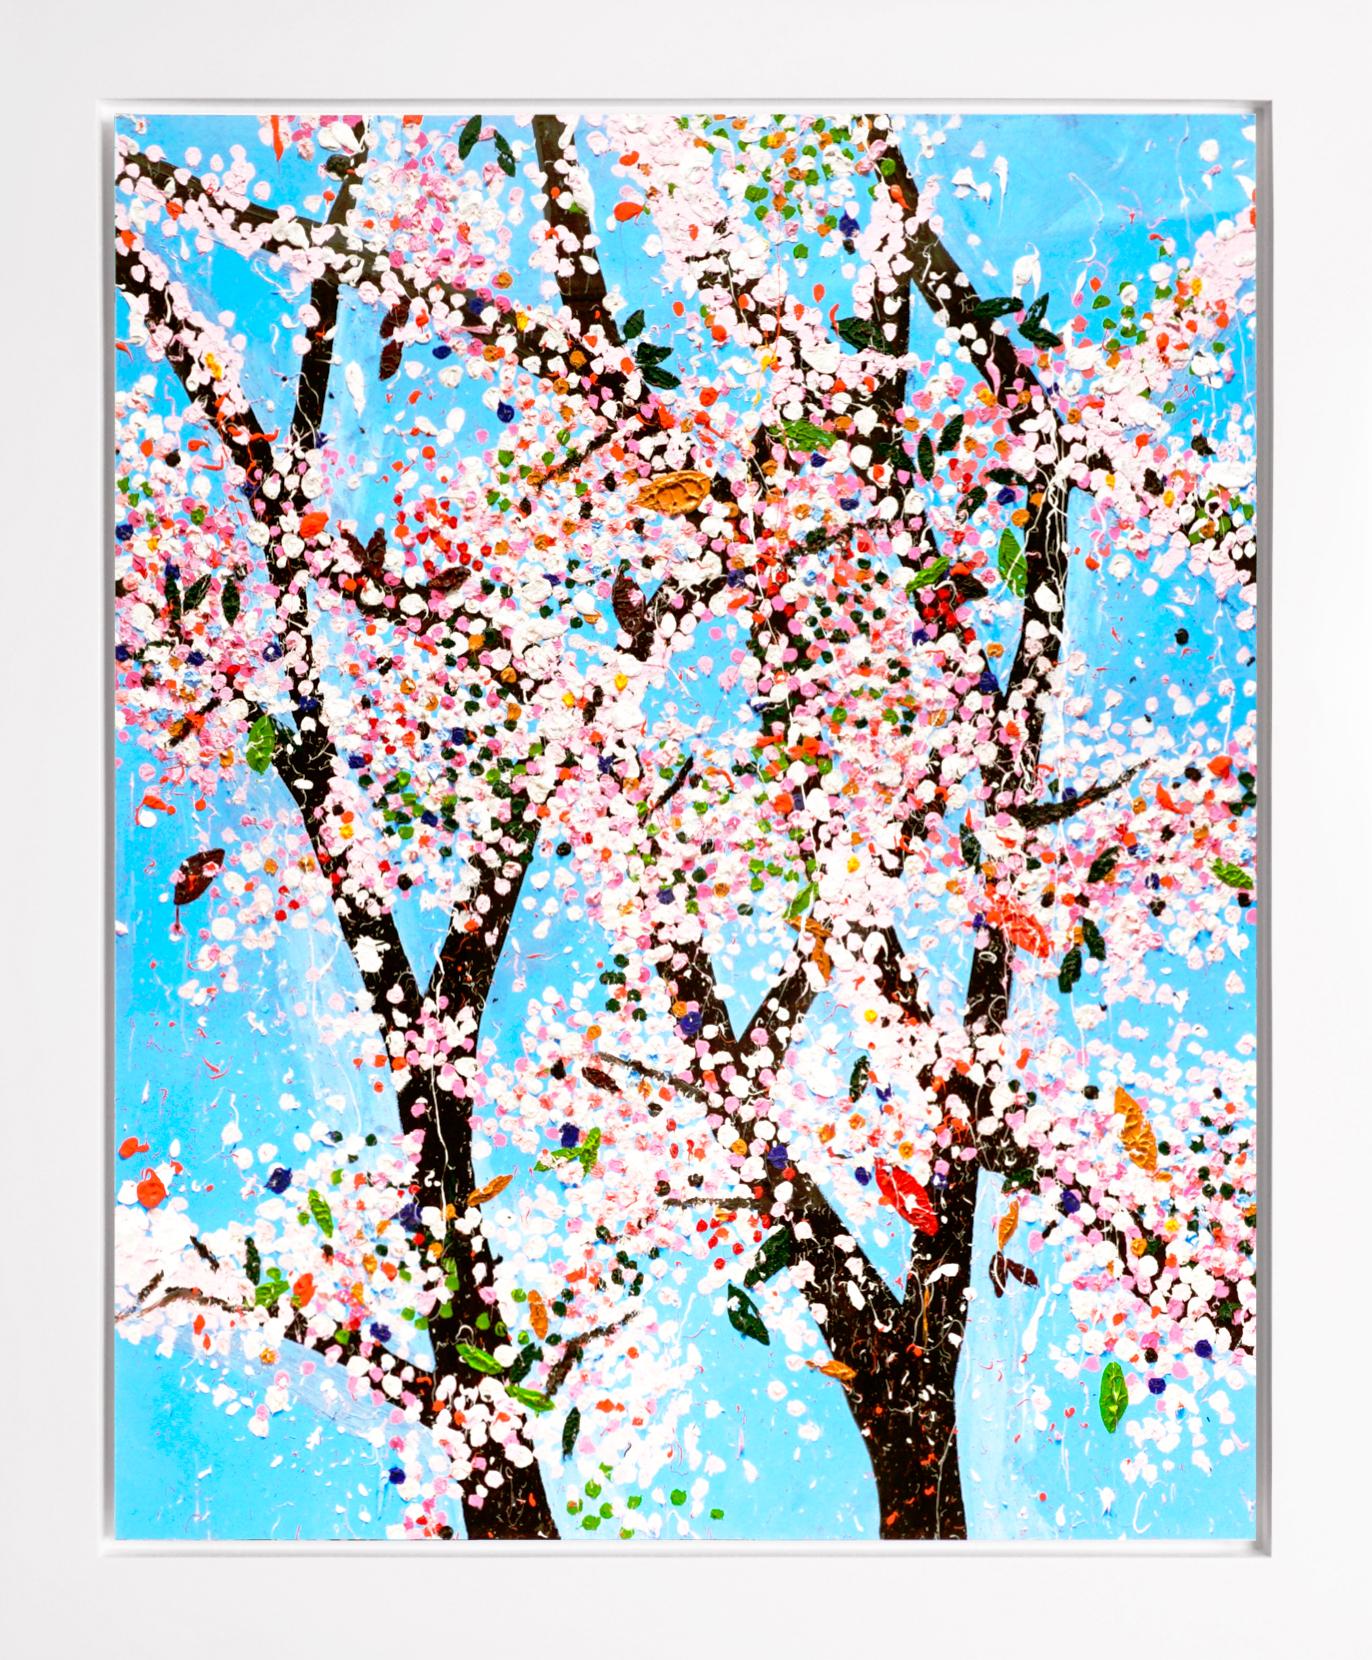 Damien Hirst Abstract Print - The Virtues 'Honour', Limited Edition 'Cherry Blossom' Landscape